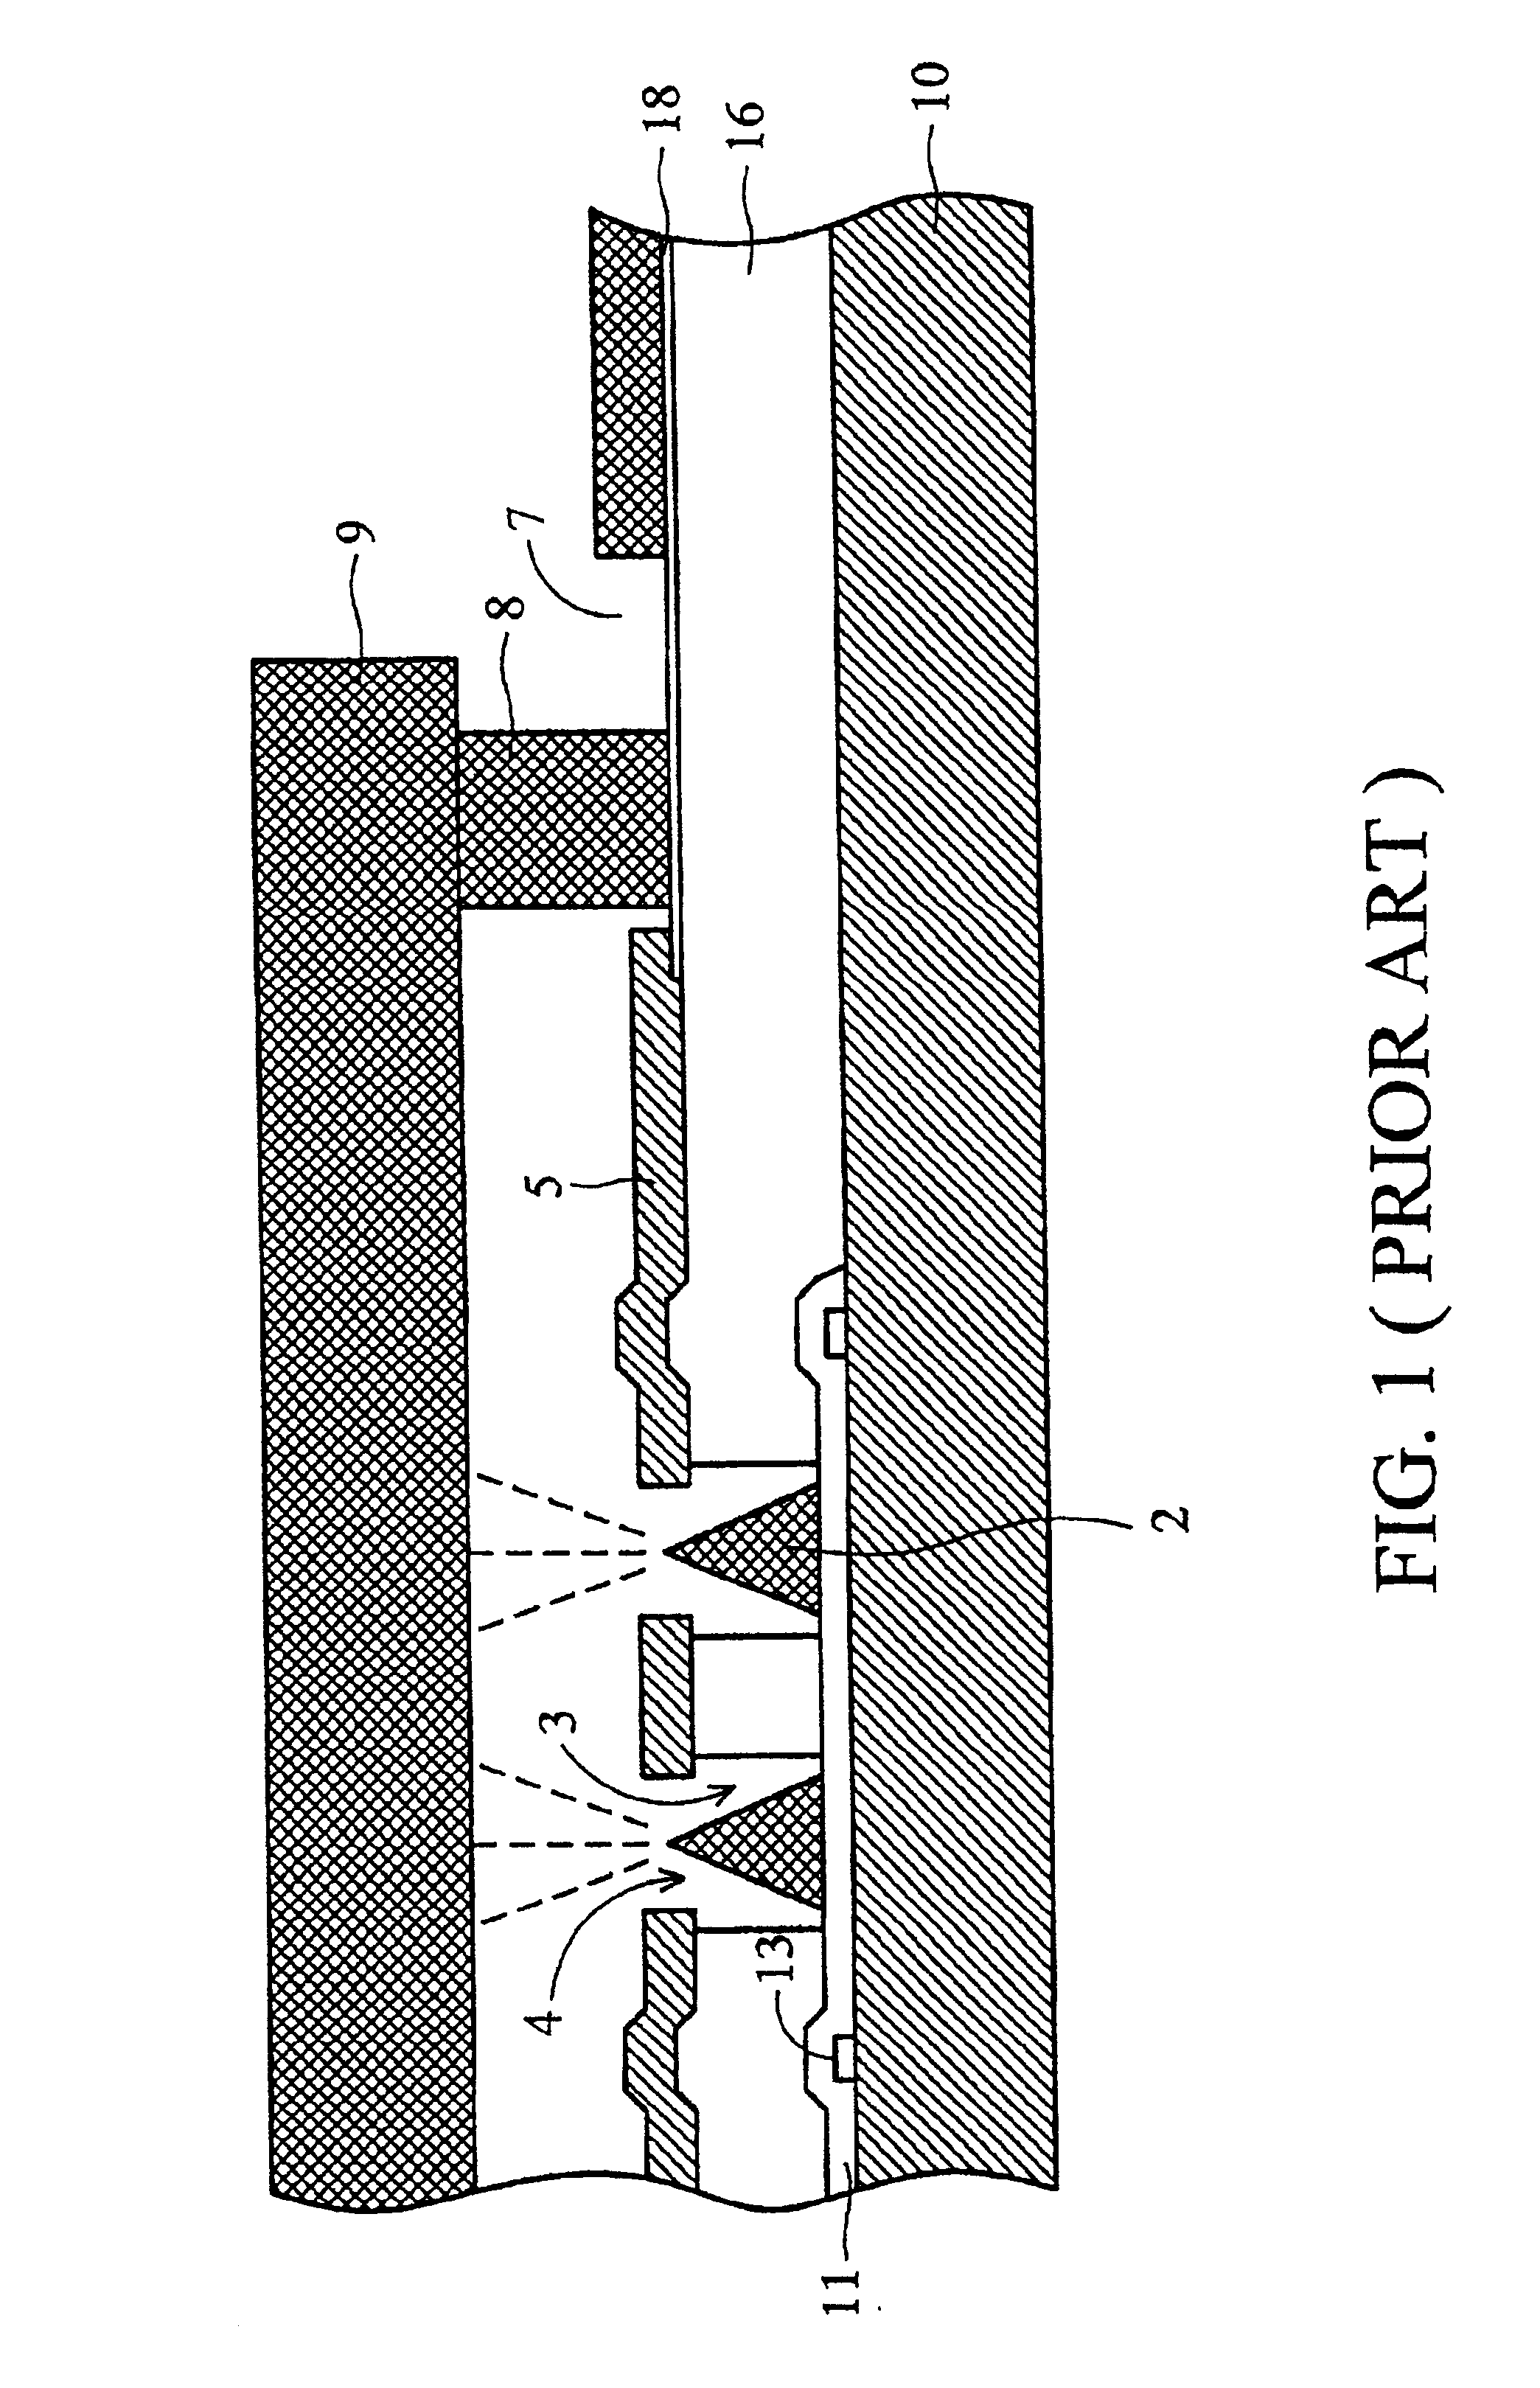 Field emission display cathode (FED) plate with an internal via and the fabrication method for the cathode plate